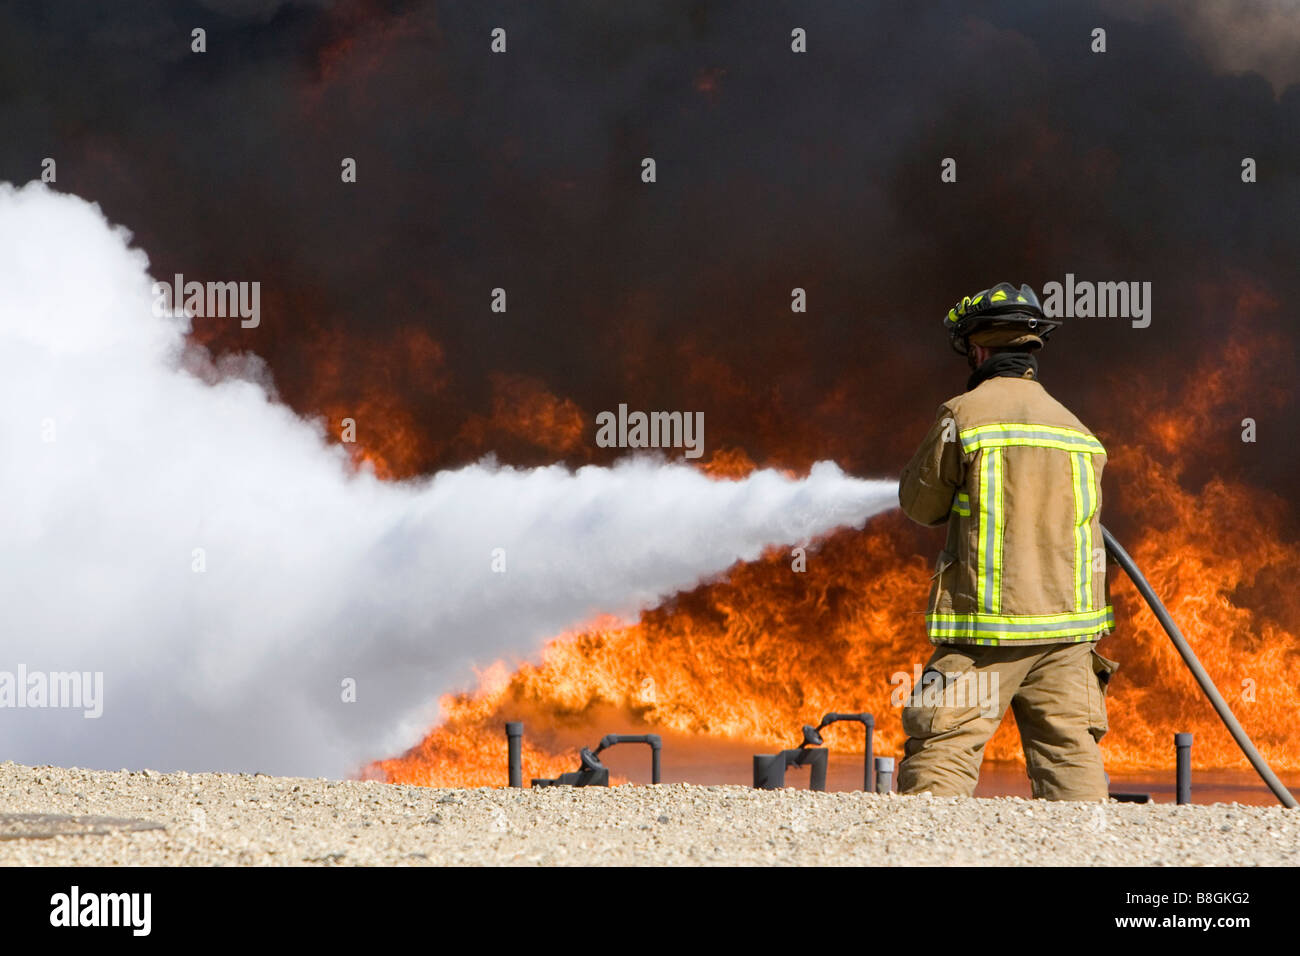 Firefighter using fire retardant foam to put out a jet fuel fire at an airport training facility in Boise Idaho USA Stock Photo